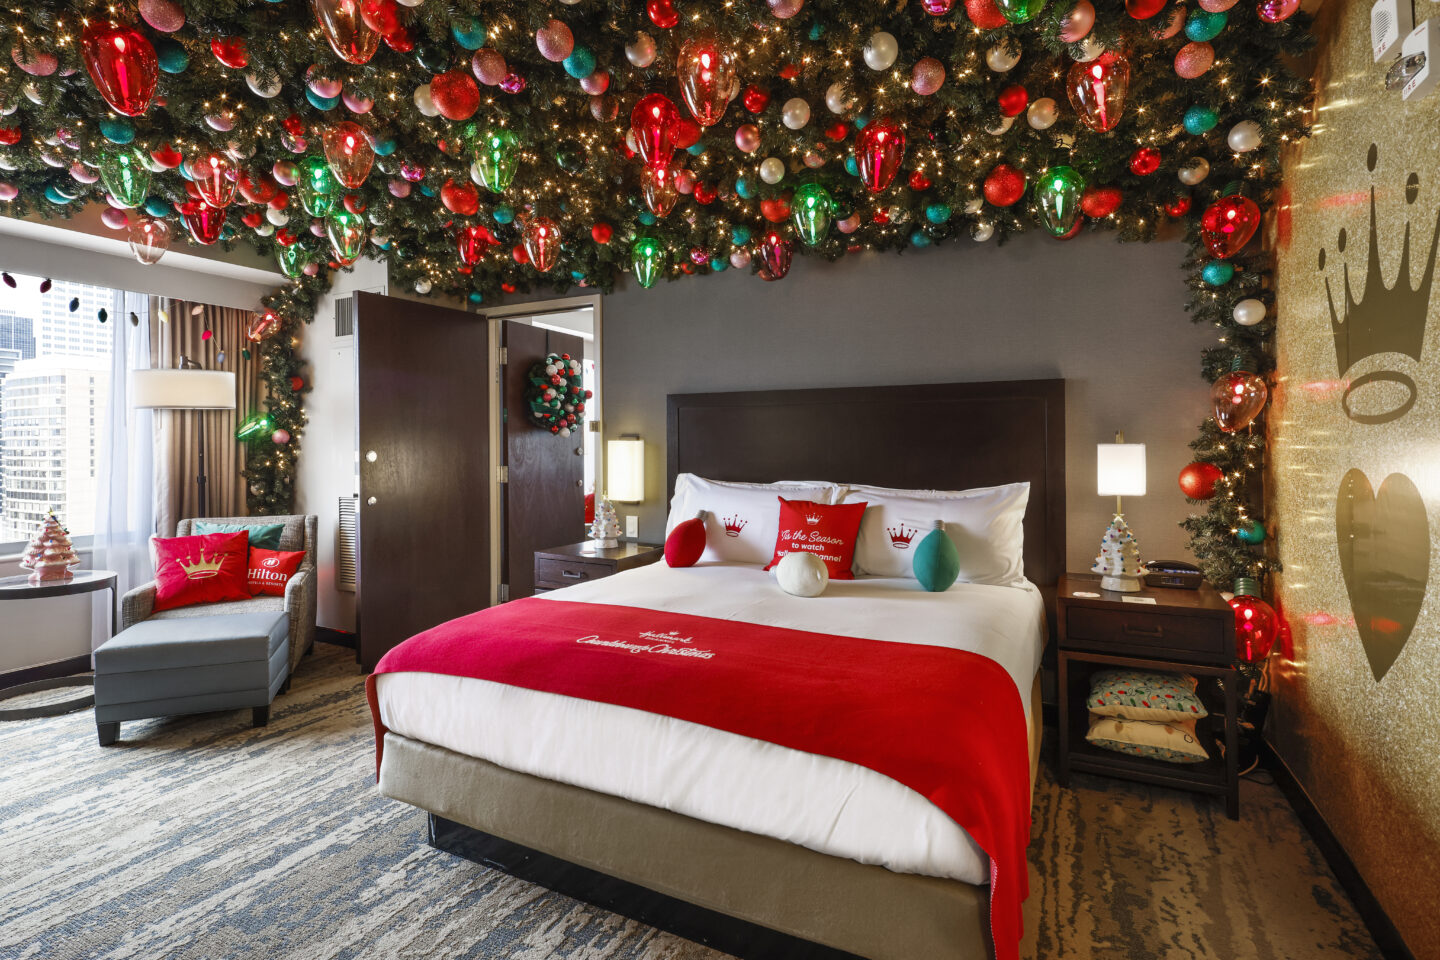 Hallmark Channel and Hilton Hotels - Houston Haul out the Holly suite